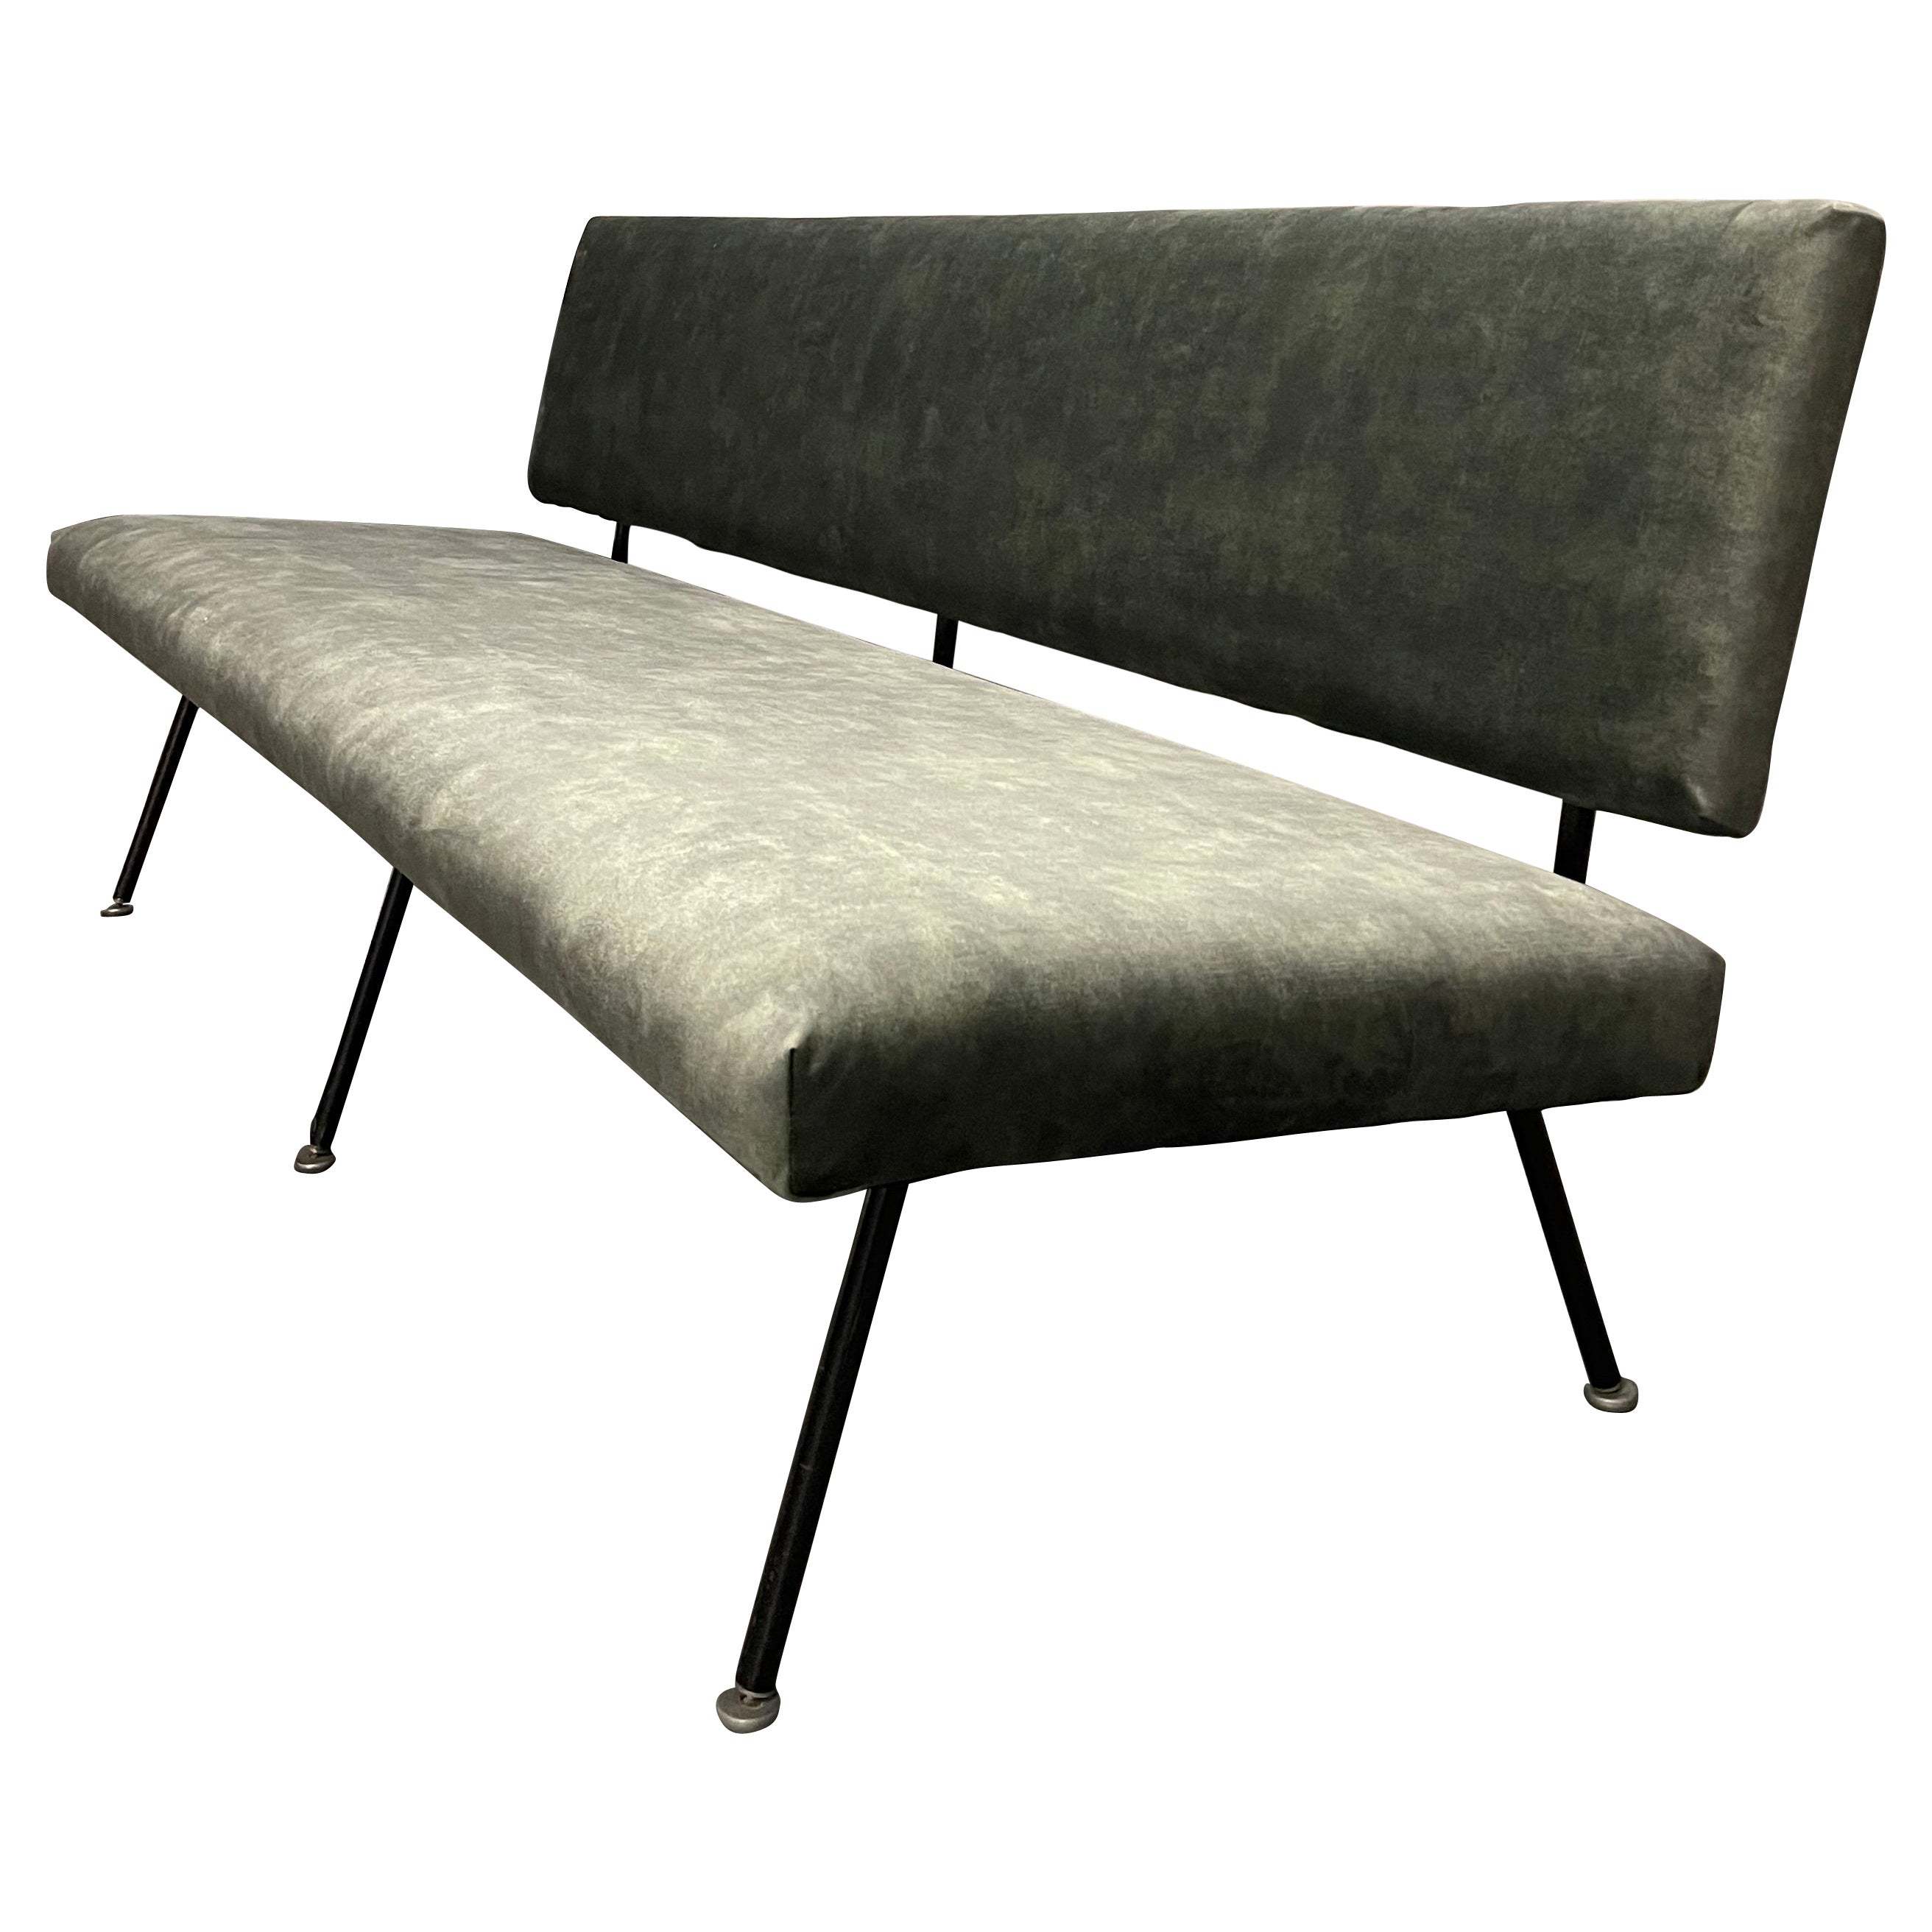 Rare No. 33 Sofa by Florence Knoll For Sale